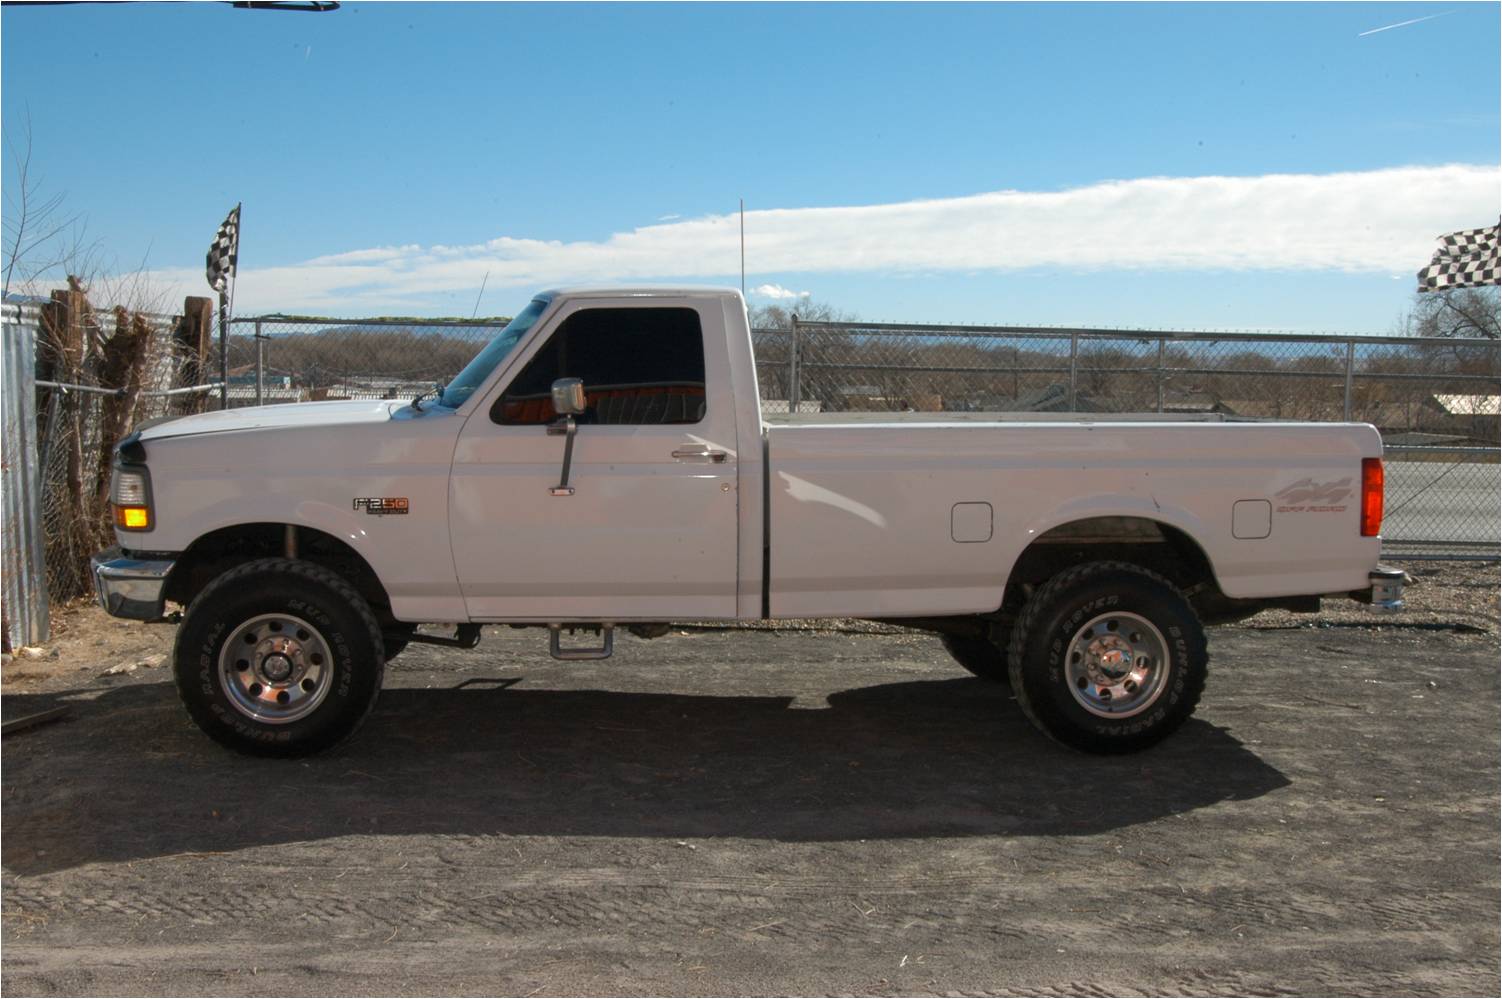 Image of a 1990s model white Ford pickup truck that is similar to one used in the Dec. 1, 2007, shooting at Abiquiu